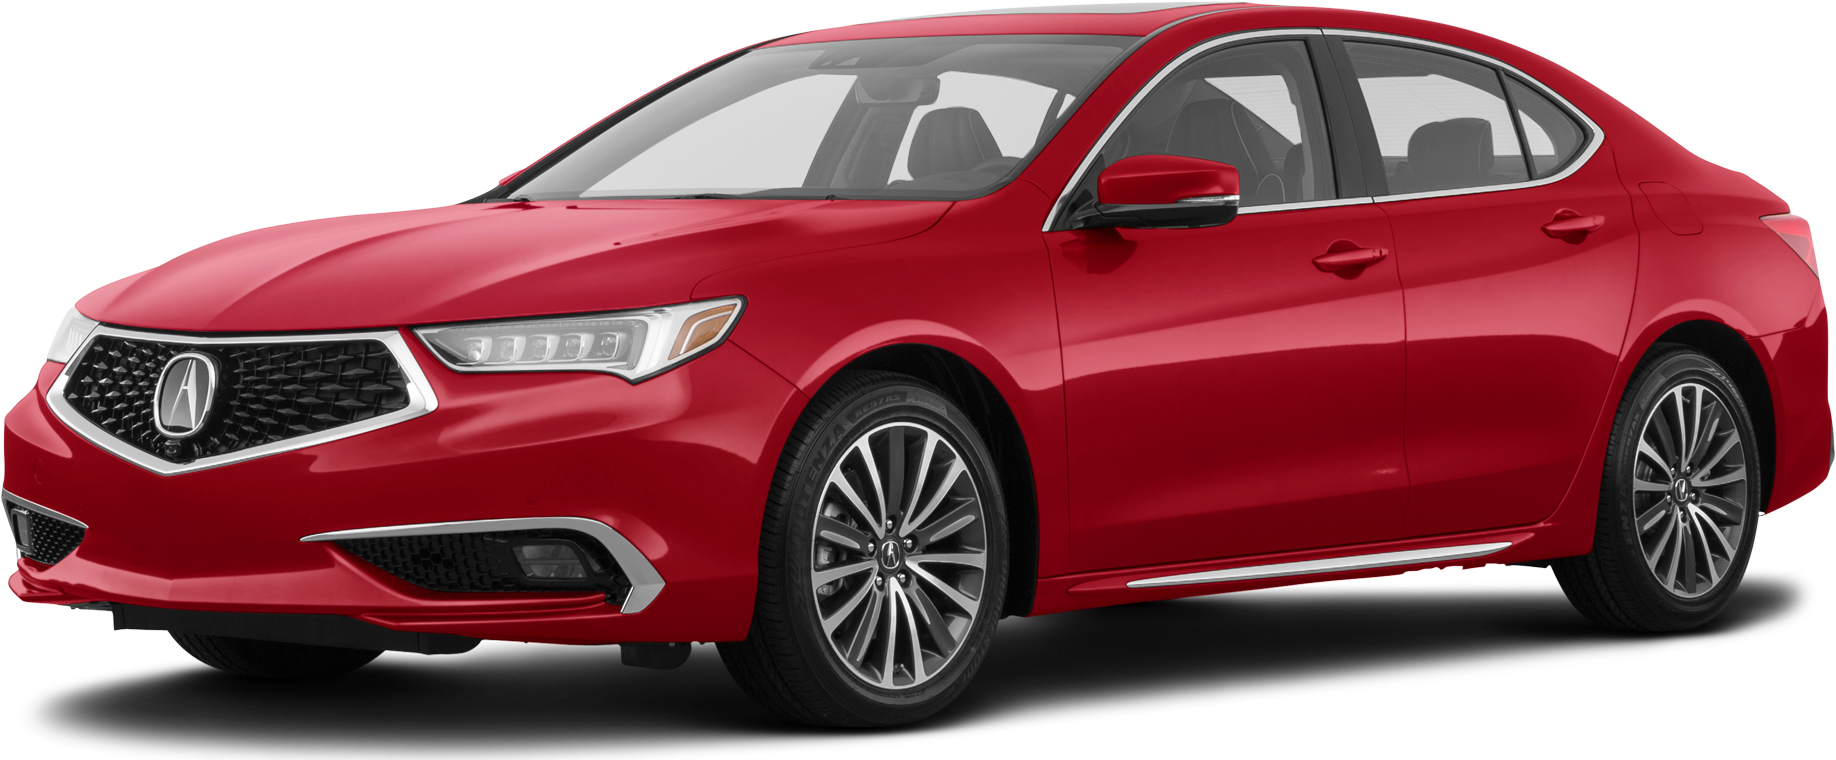 2020 Acura Tlx Values Cars For Sale Kelley Blue Book